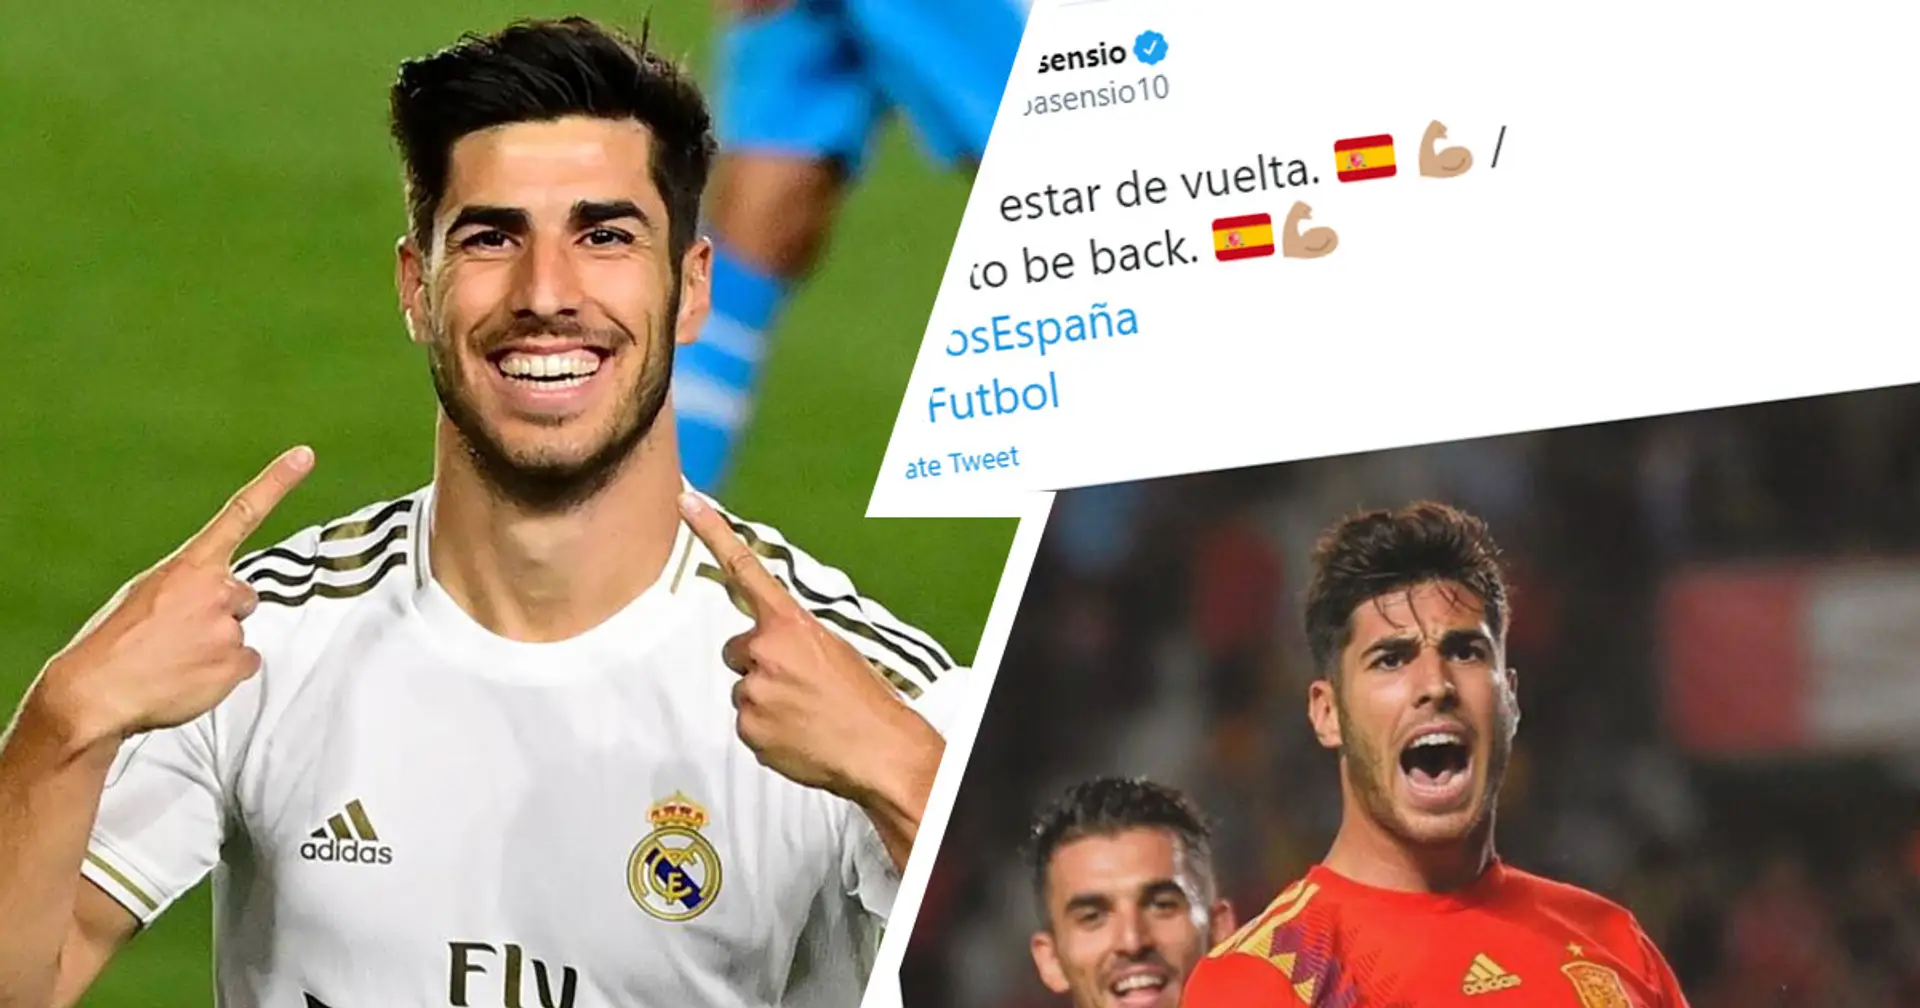 Asensio reacts to being selected in Spain squad for Nations League games